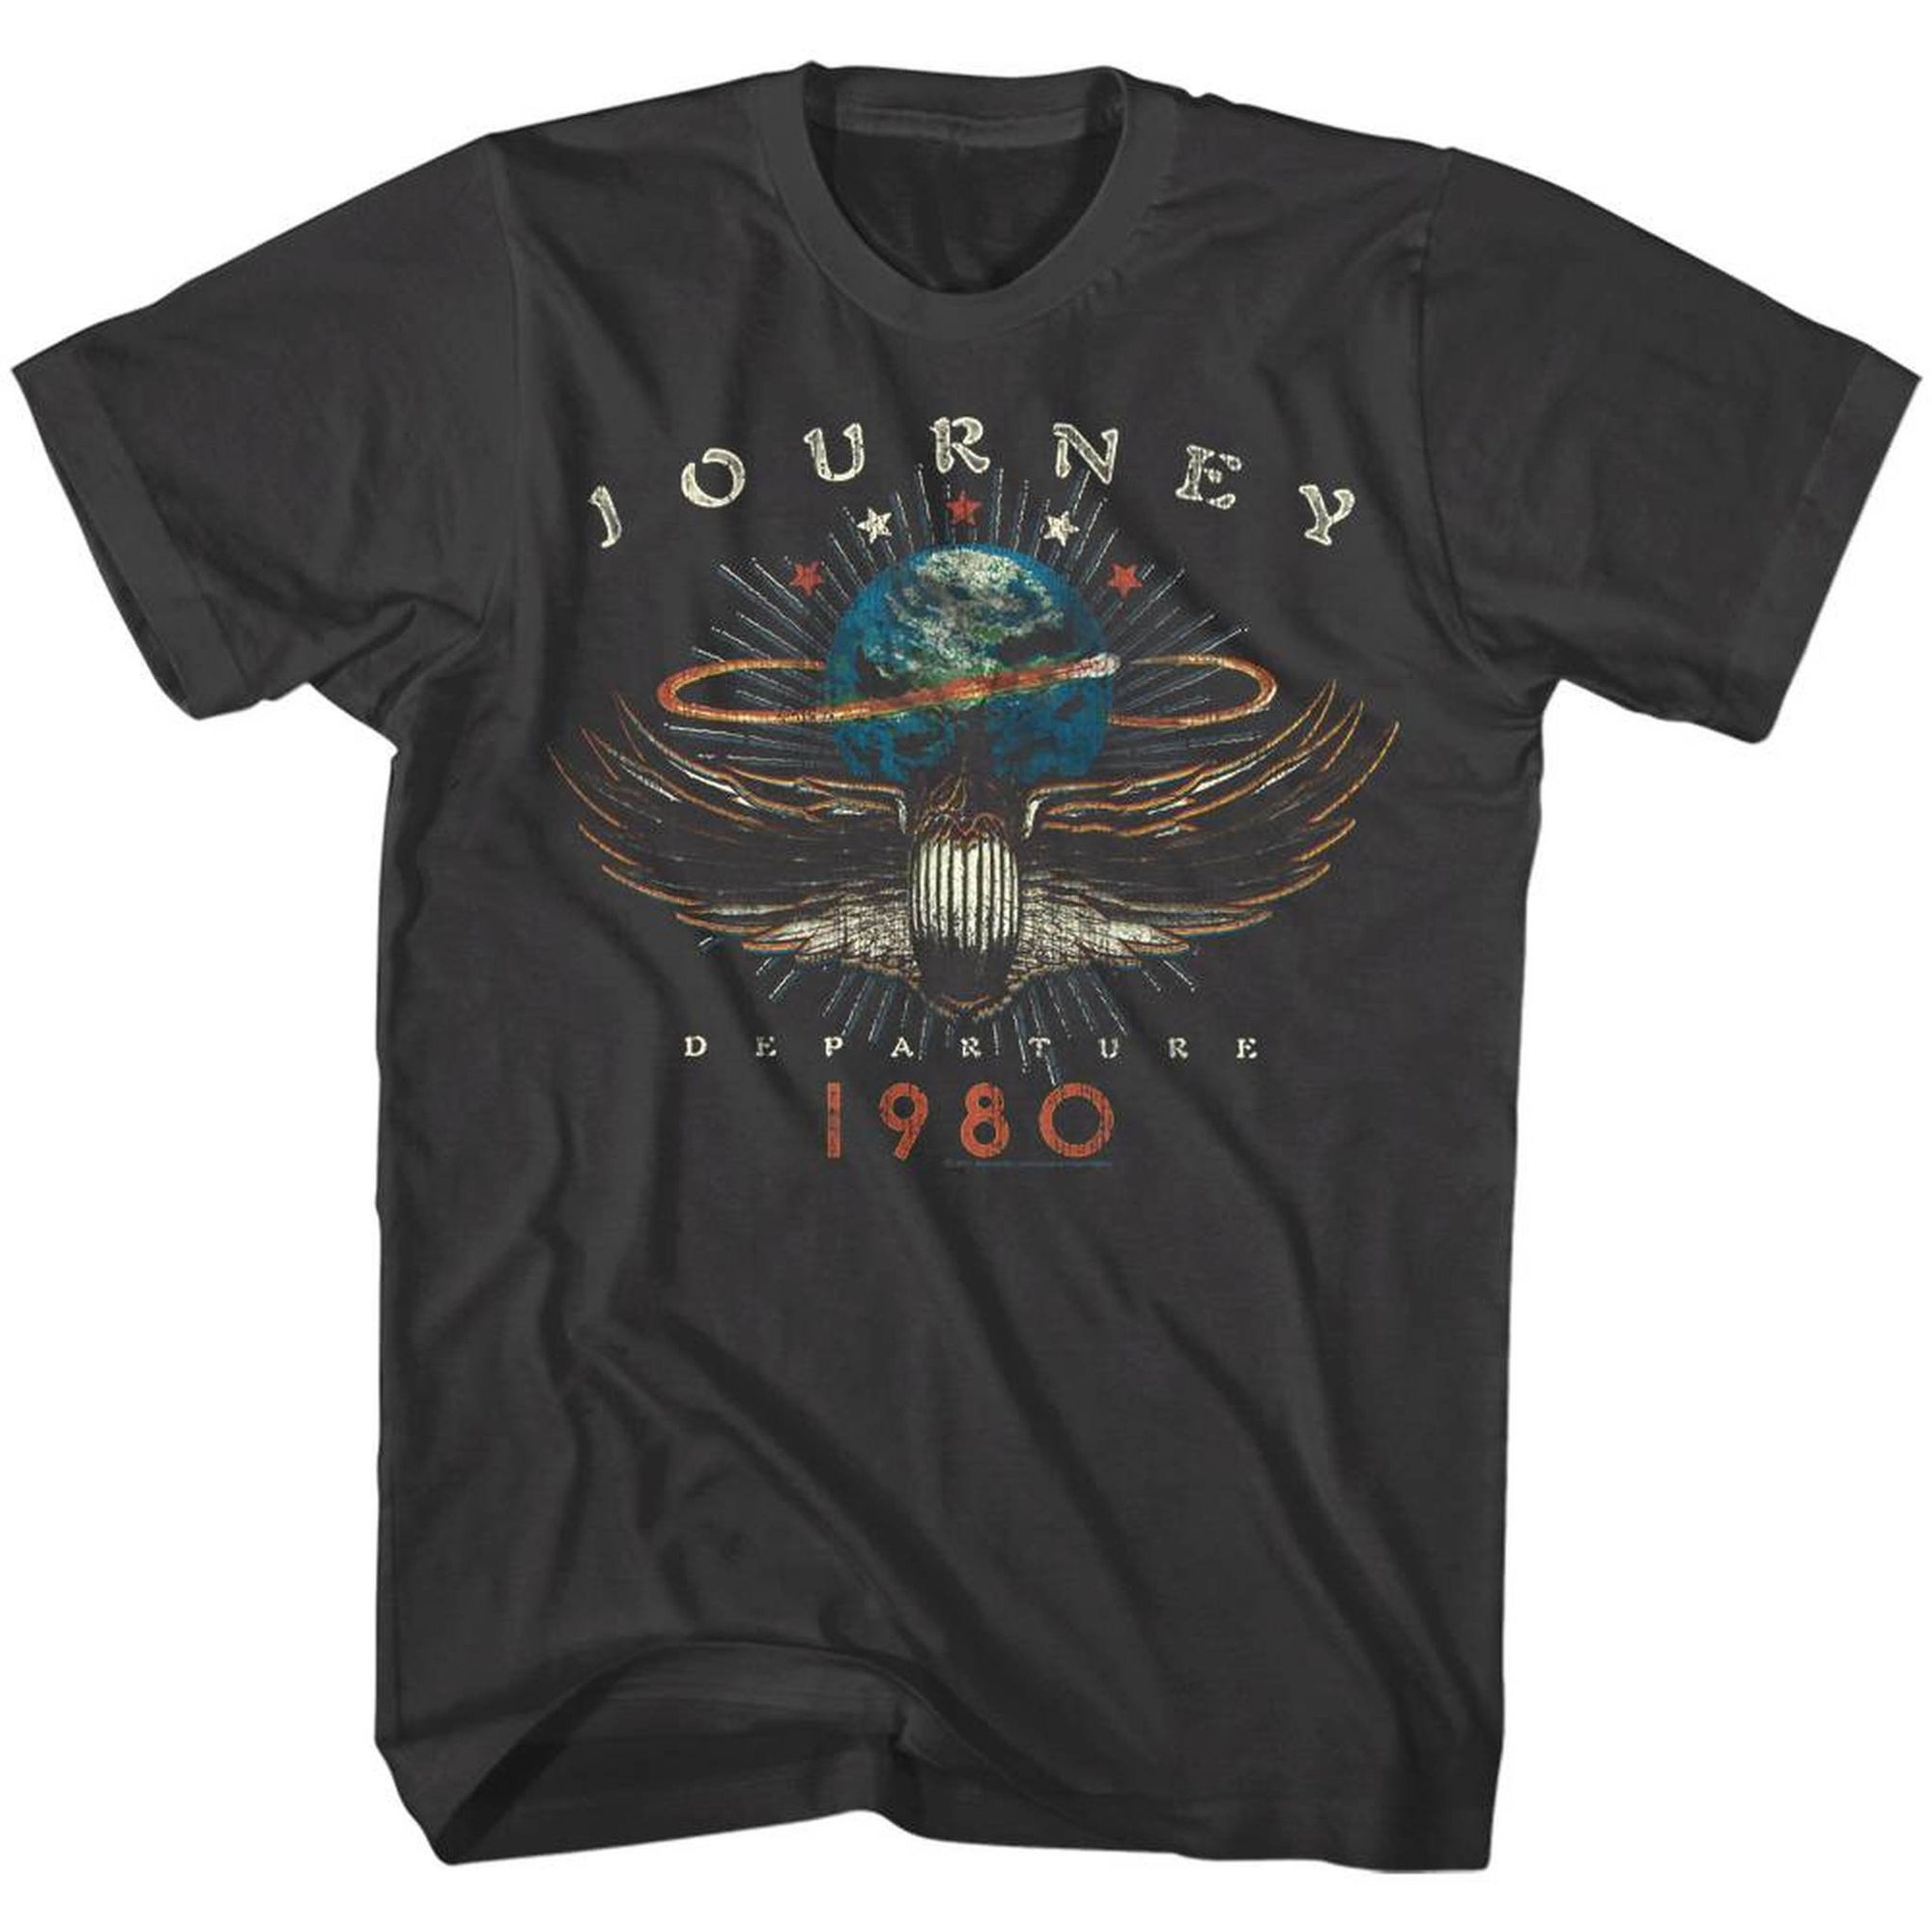 Discover Journey 1980 Smoke Adult T-Shirt